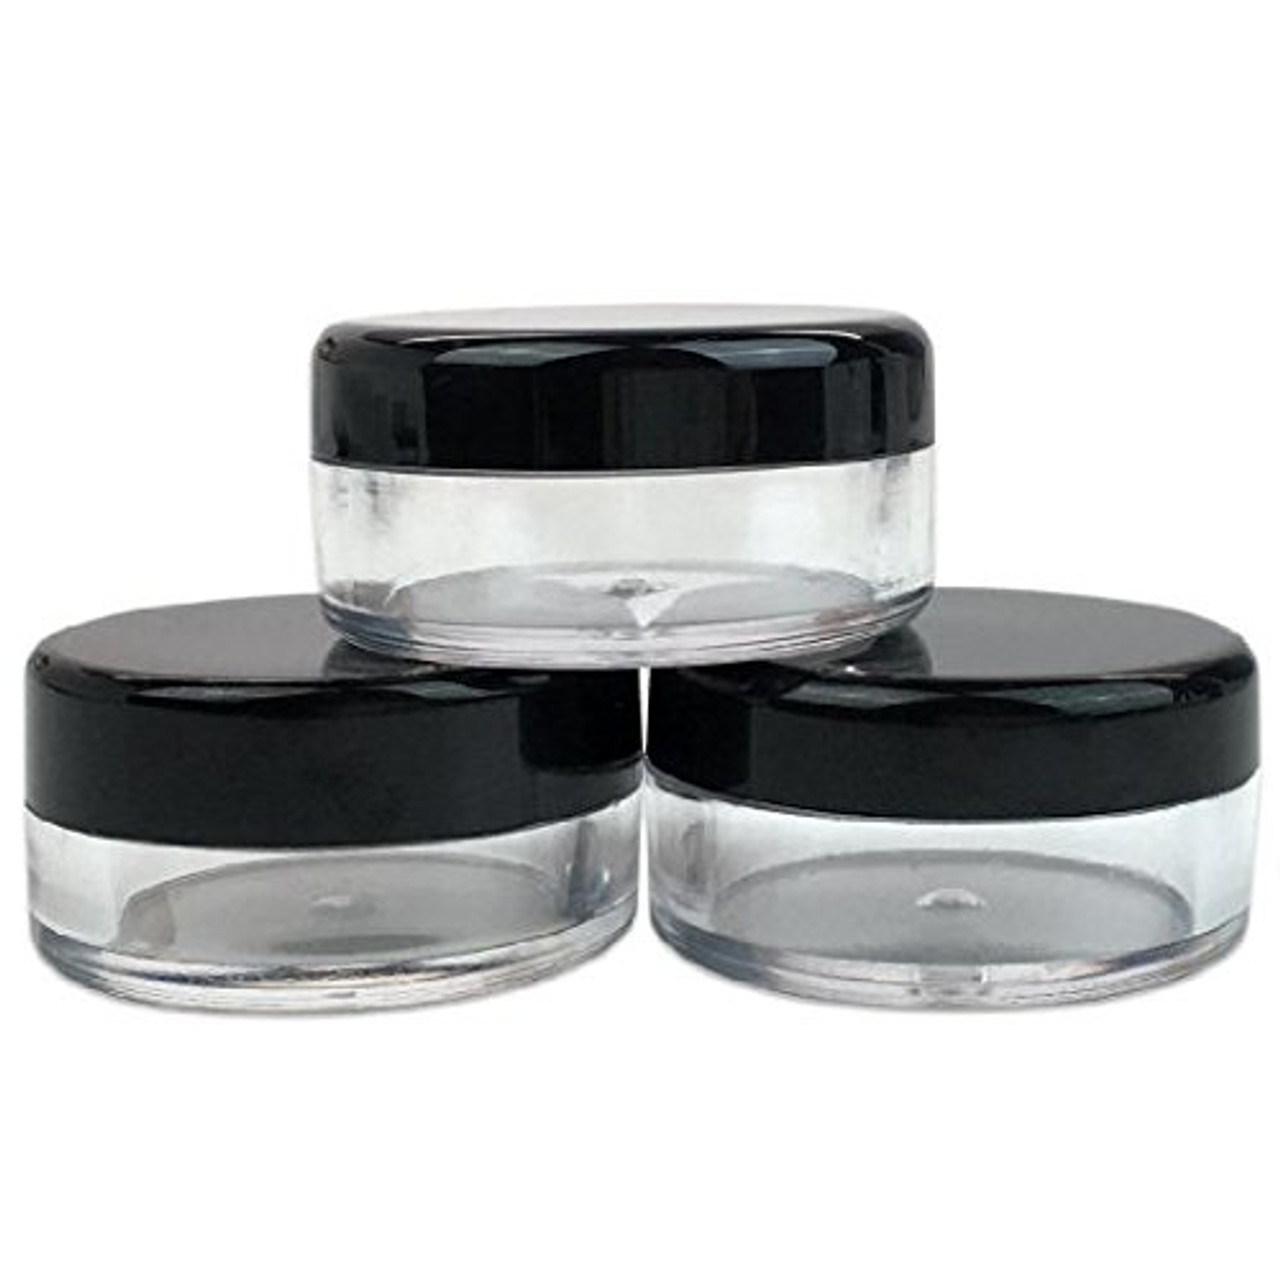  eBoot 150 Piece 3 Oz Plastic Container Jars with Lids Round  Clear Cosmetic Jars Empty Clear Plastic Jars for Lotion, Cream, Ointments,  Makeup, Eye Shadow, Rhinestone, Samples, Pot, Travel Storage 